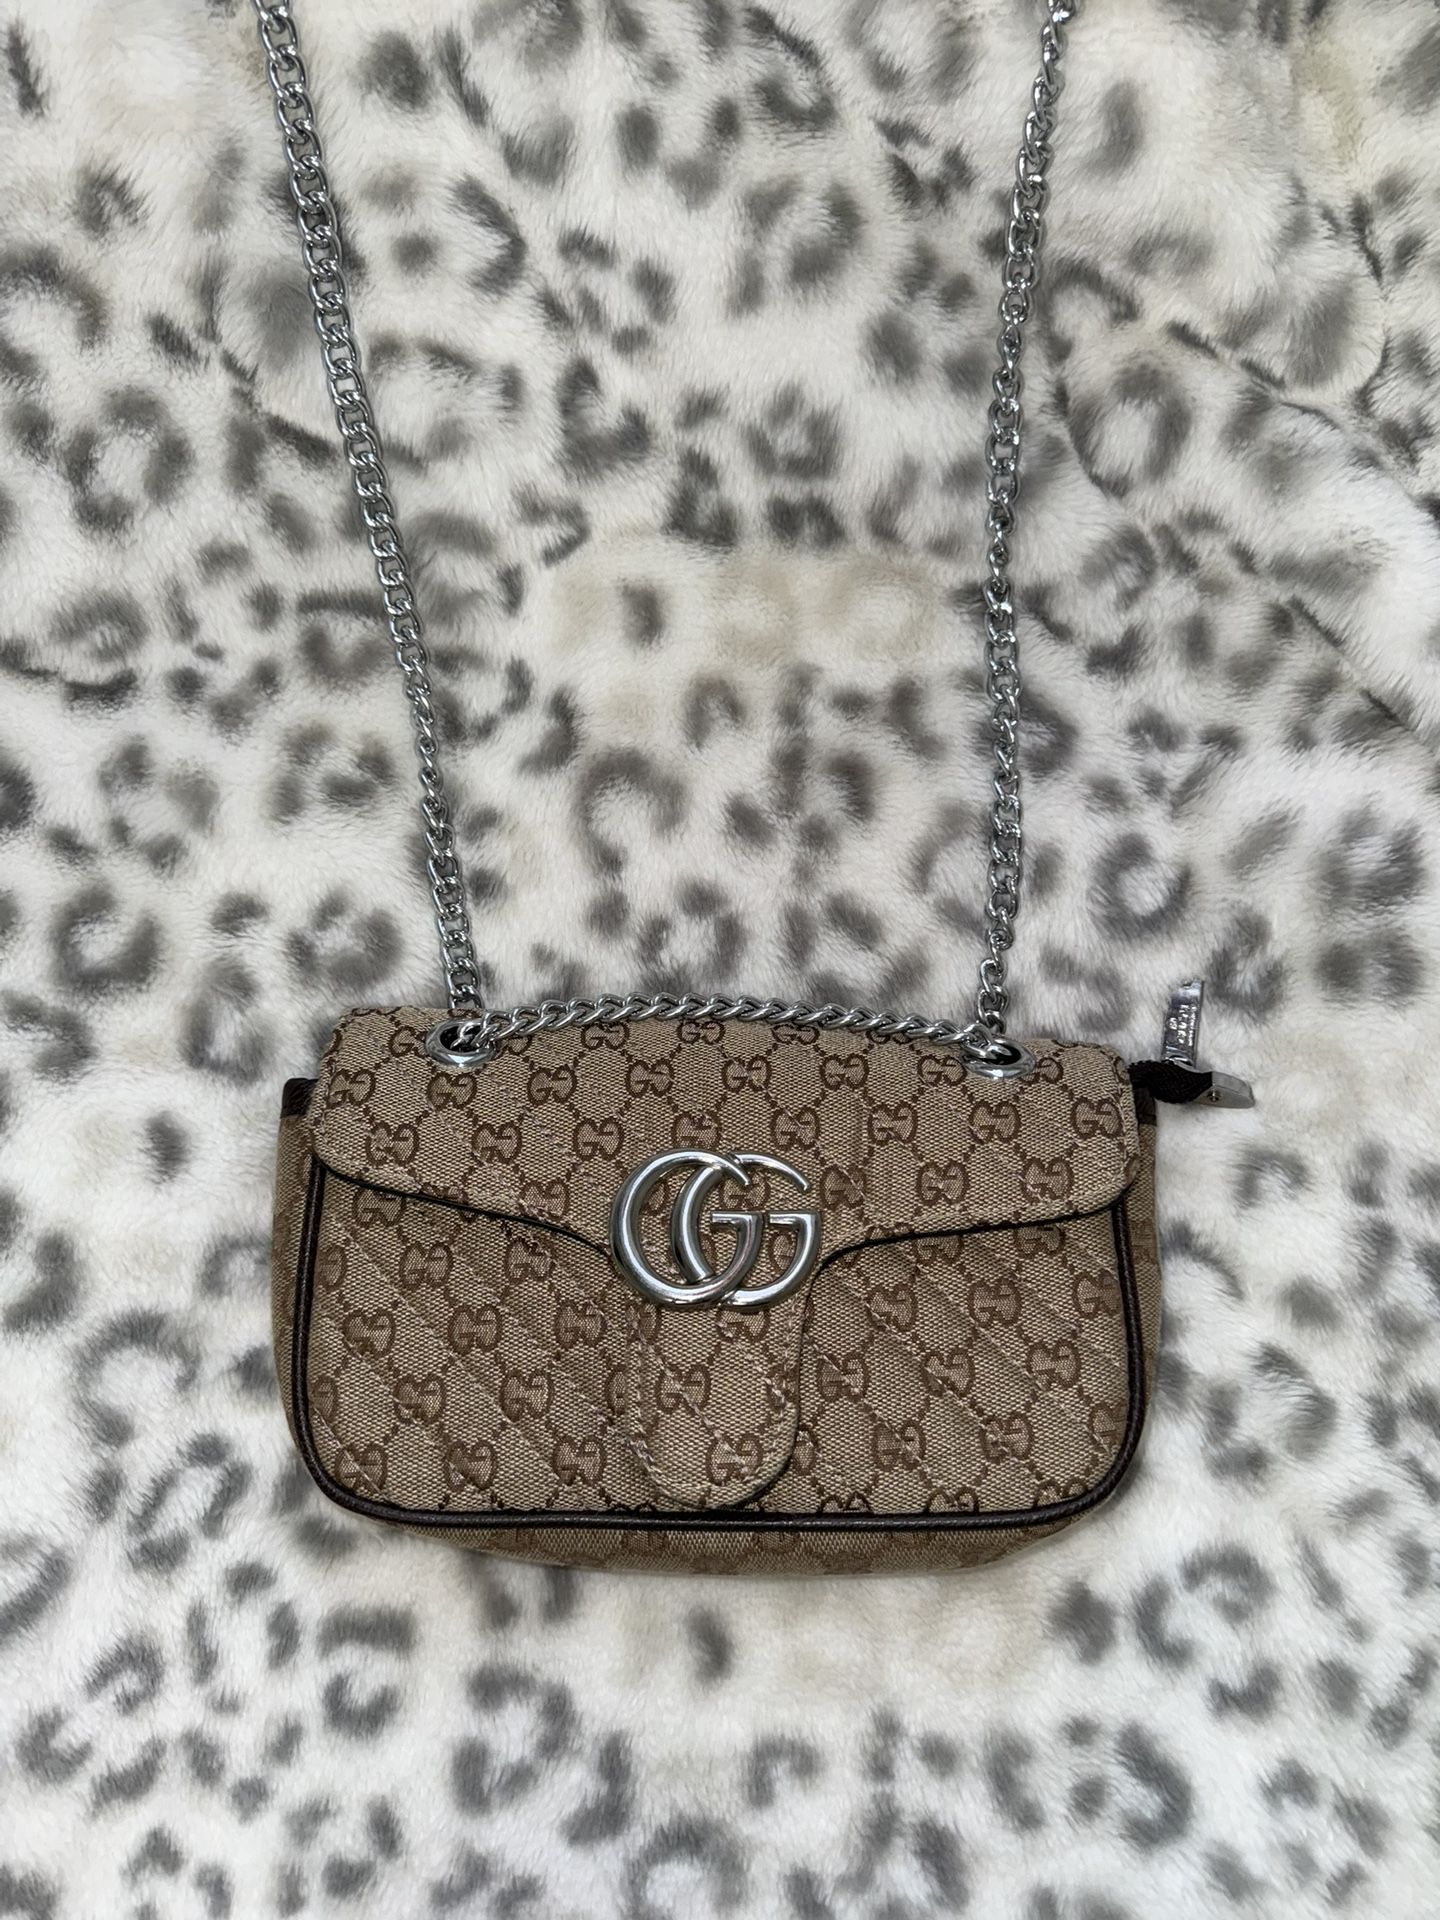 Real Gucci Bags